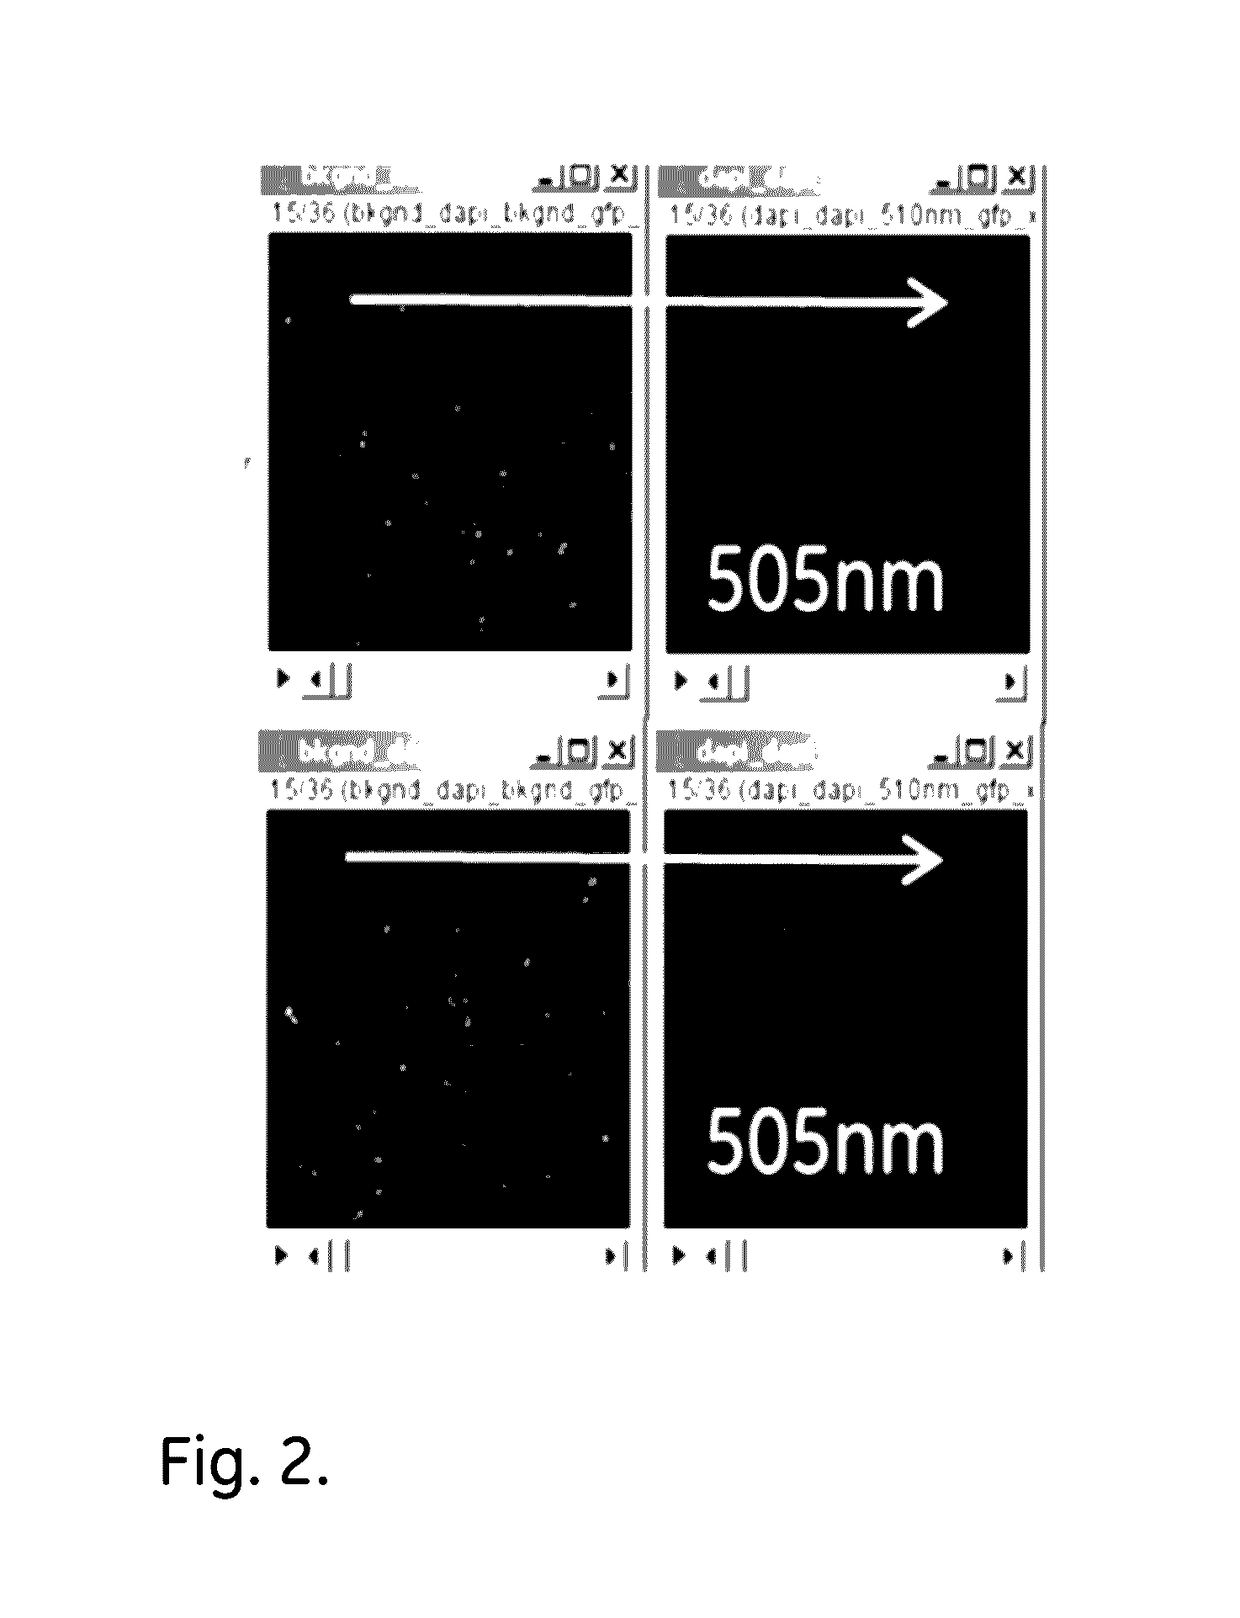 Method for reduction of autofluorescence from biological samples